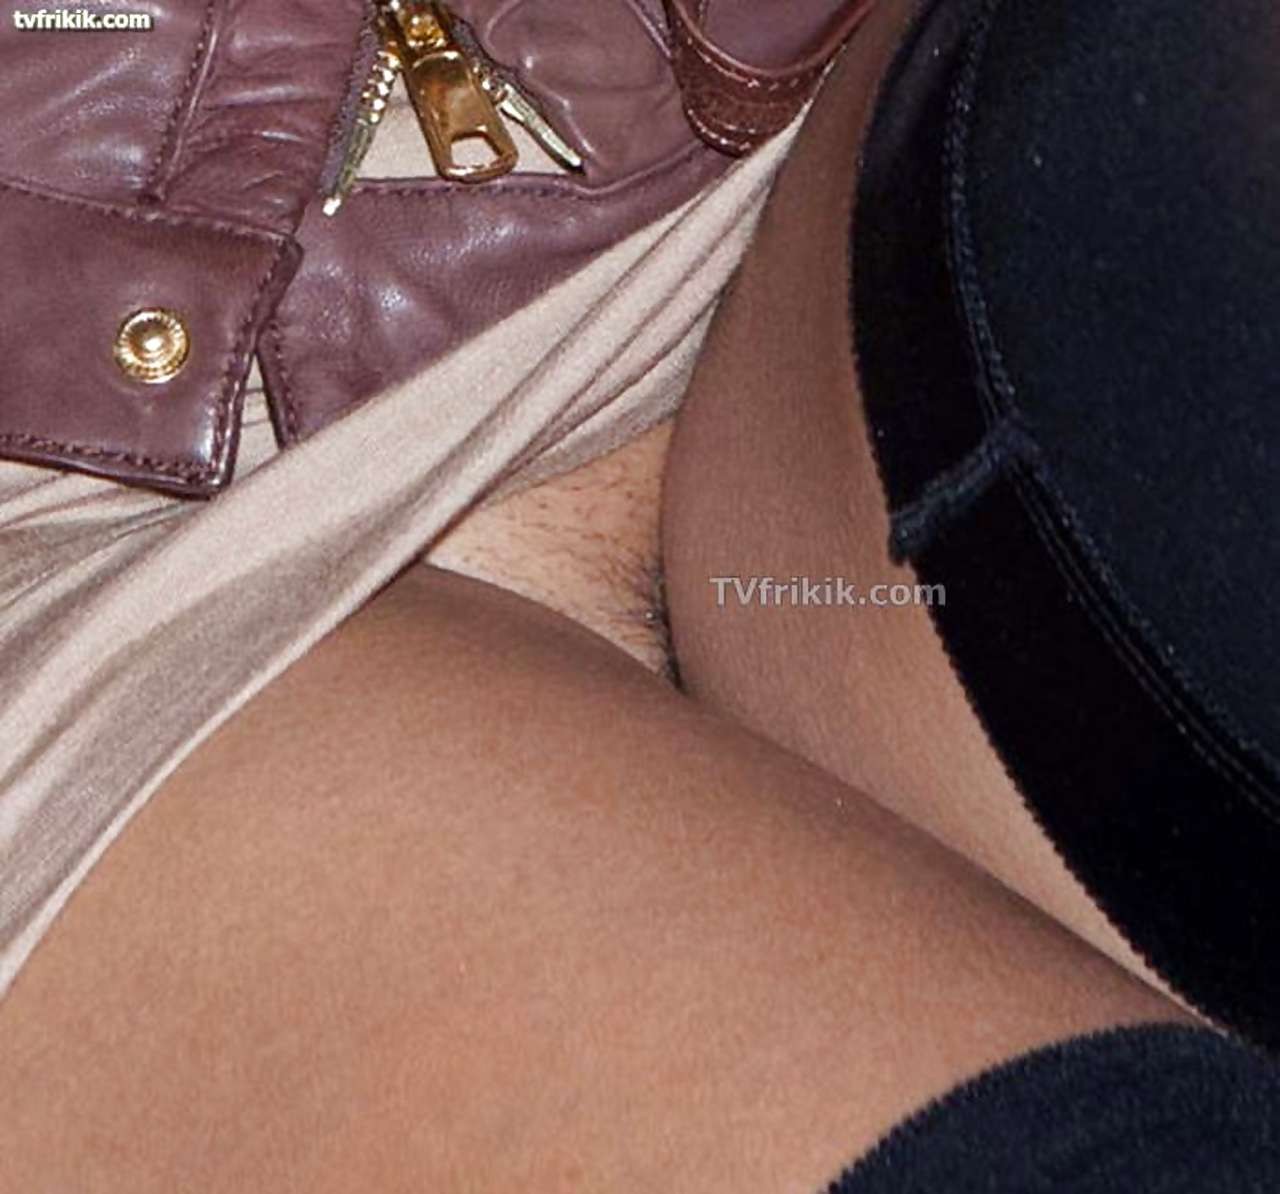 Indira Weiss showing her hairy pussy upskirt in mini skirt caught by paparazzi #75296408